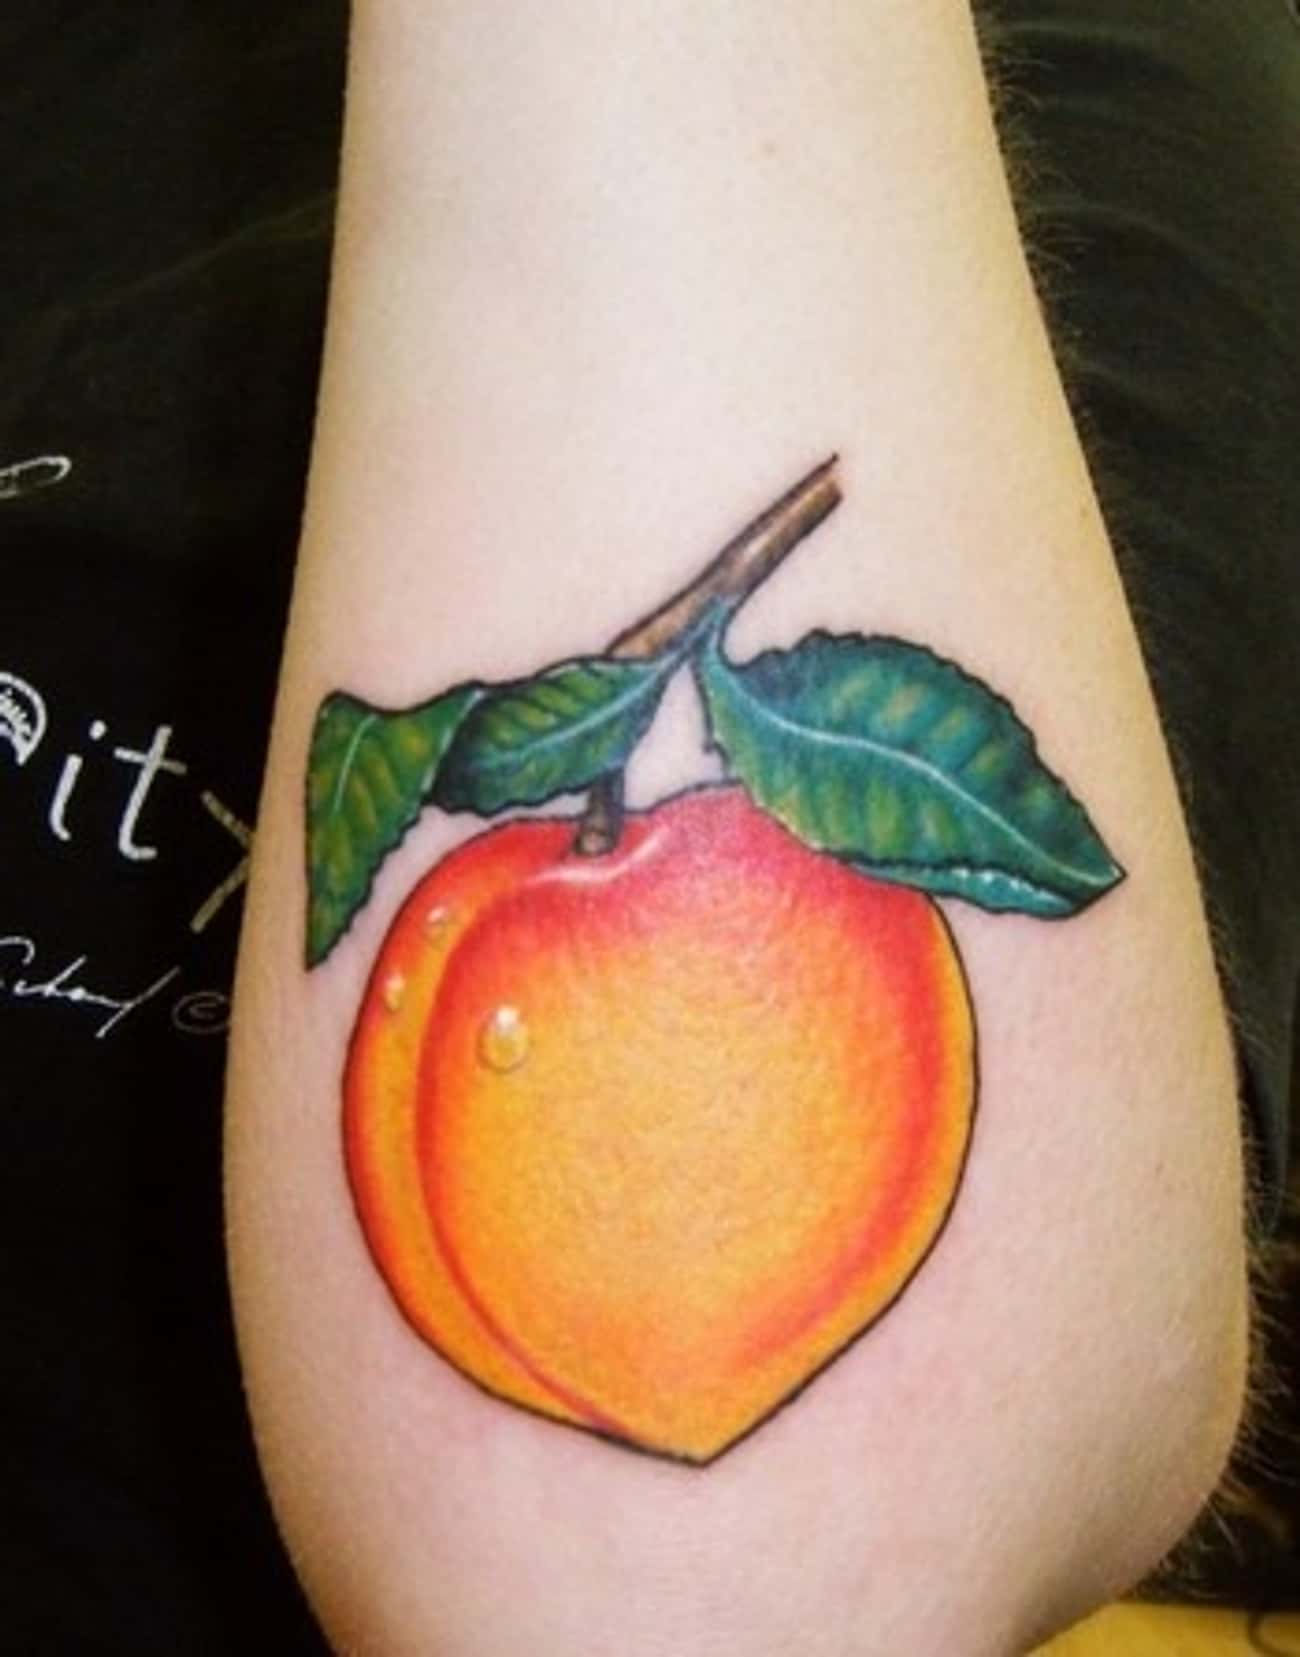 This Peachy Ink